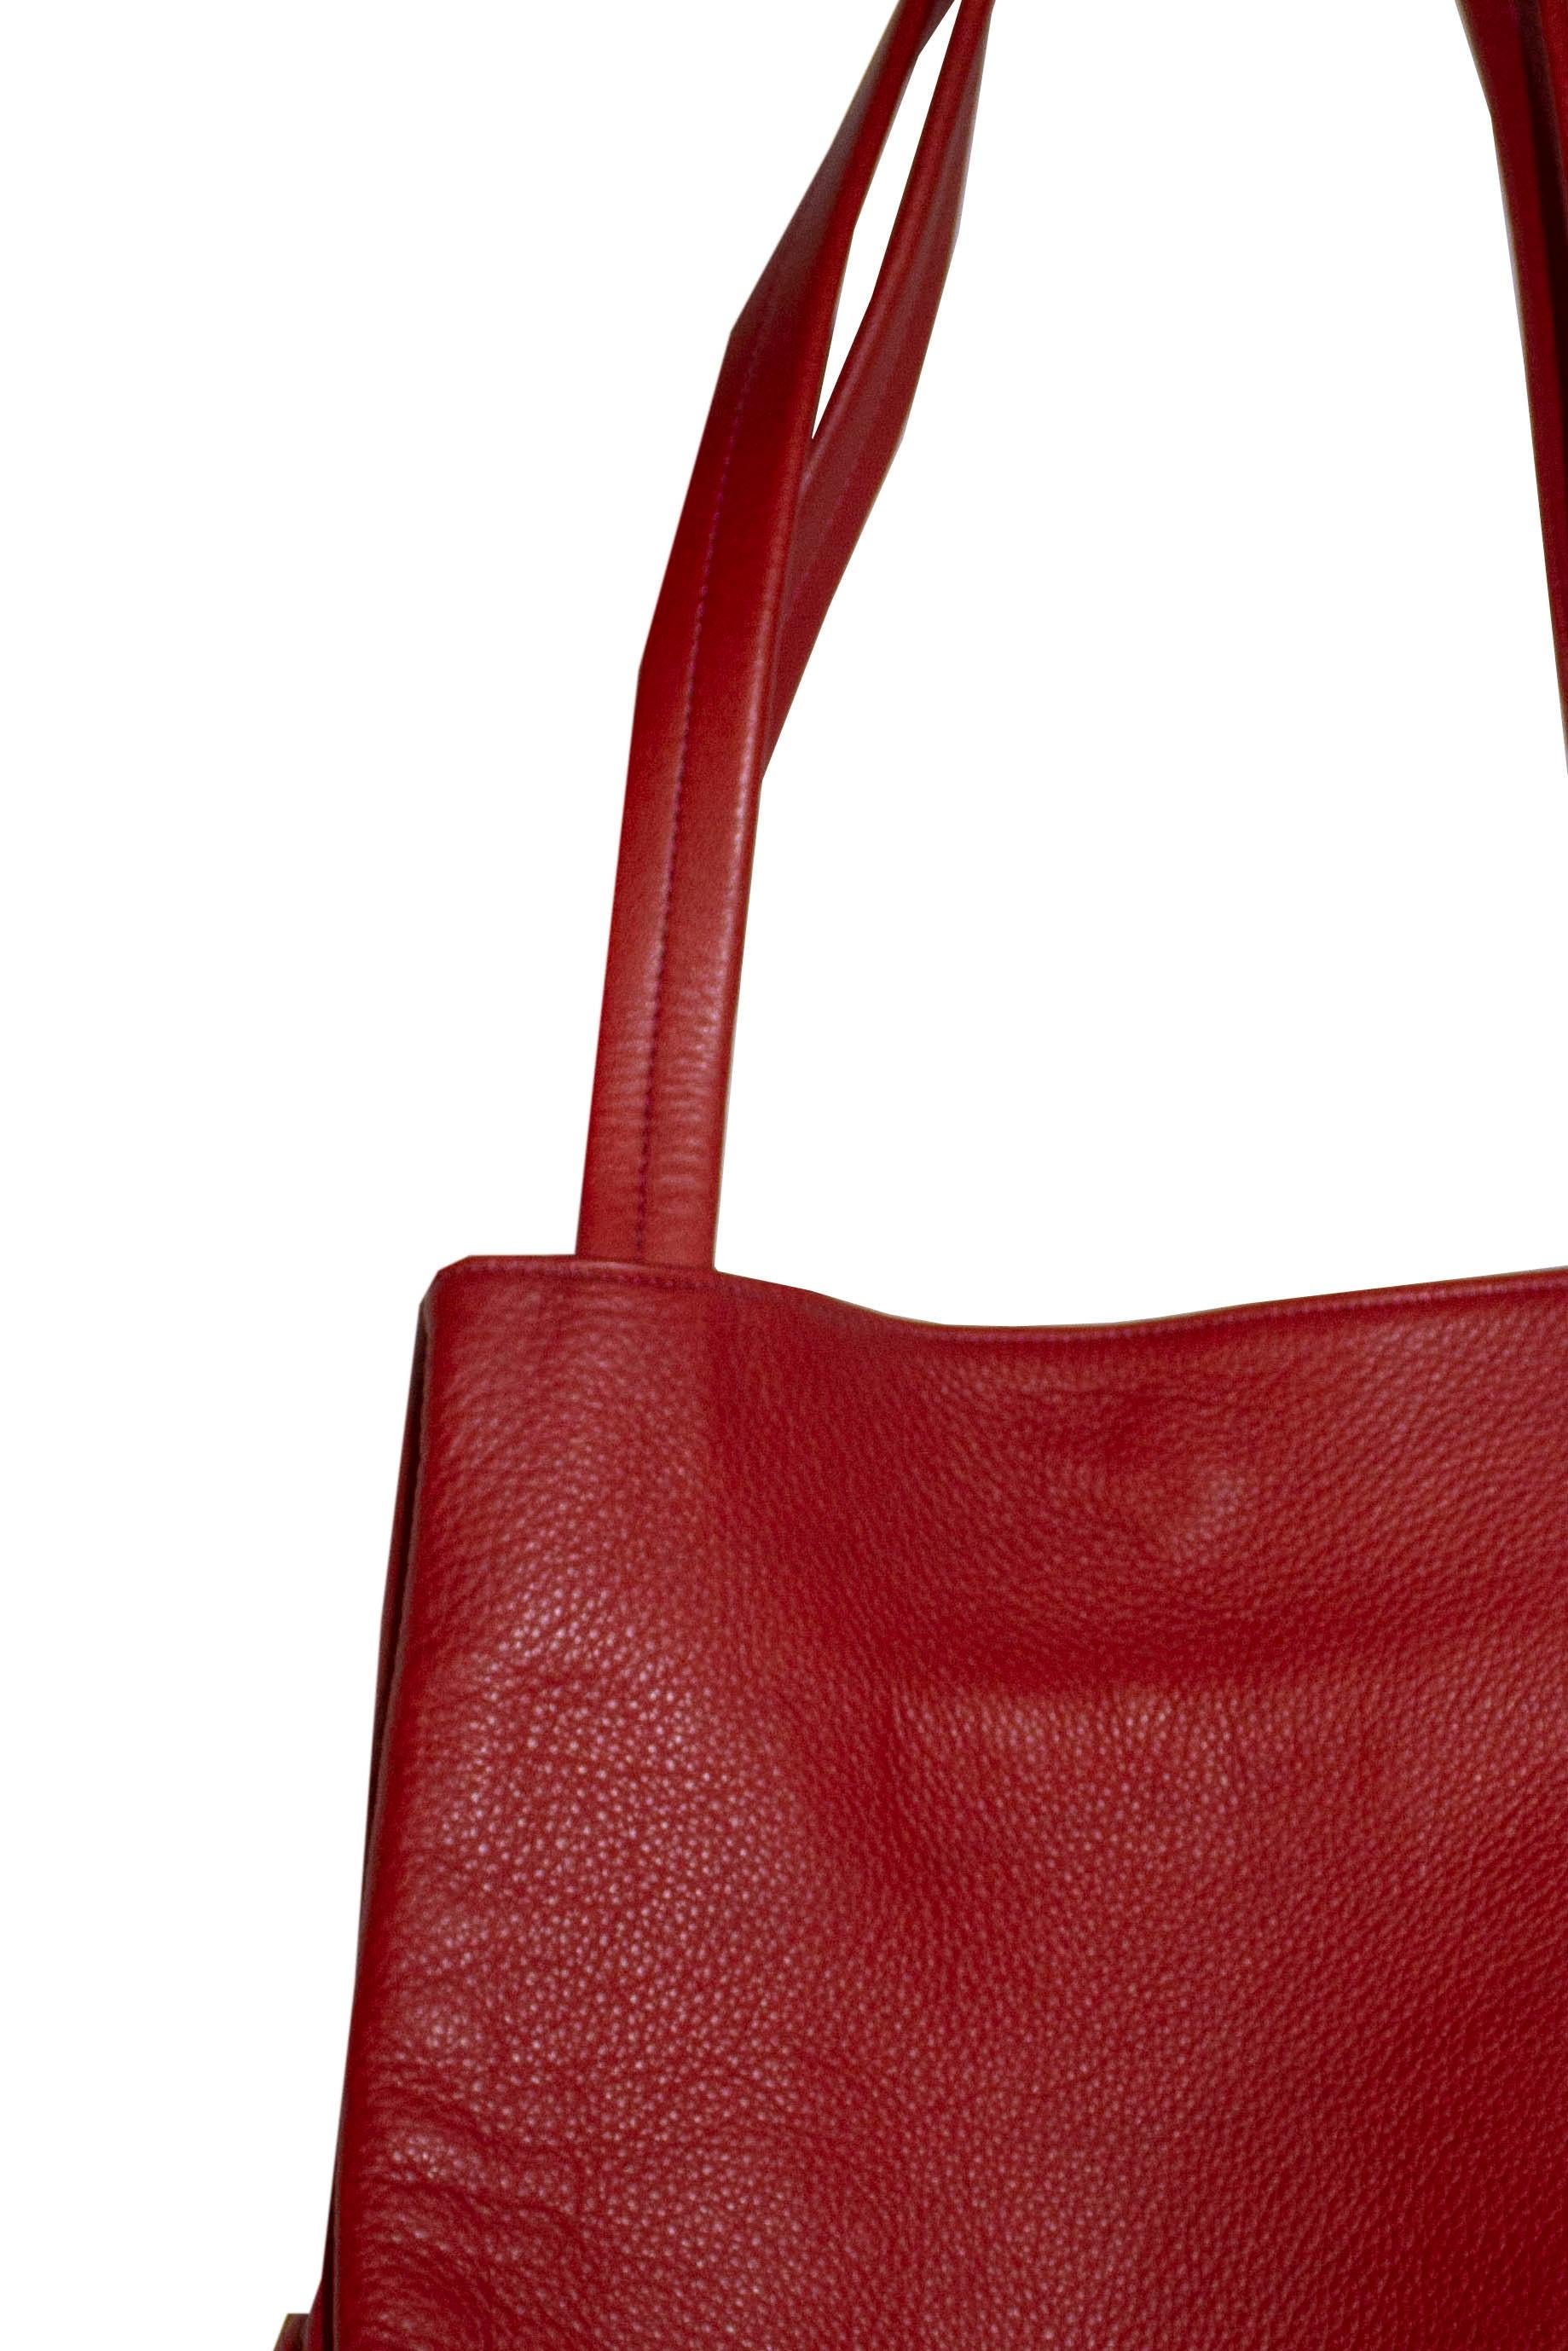 Red Leather Tote Bag by Nystrom Sweden In Good Condition For Sale In London, GB